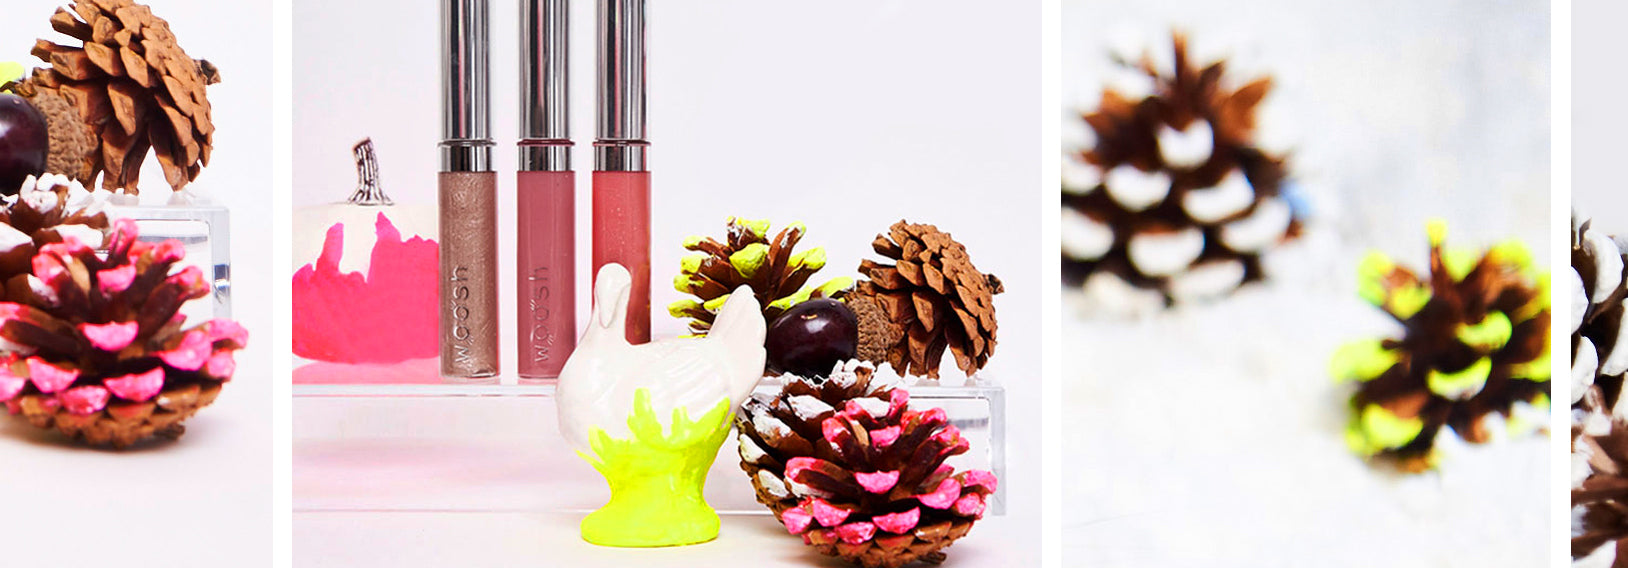 3 Spin-on lip glosses displayed with colorful pinecones